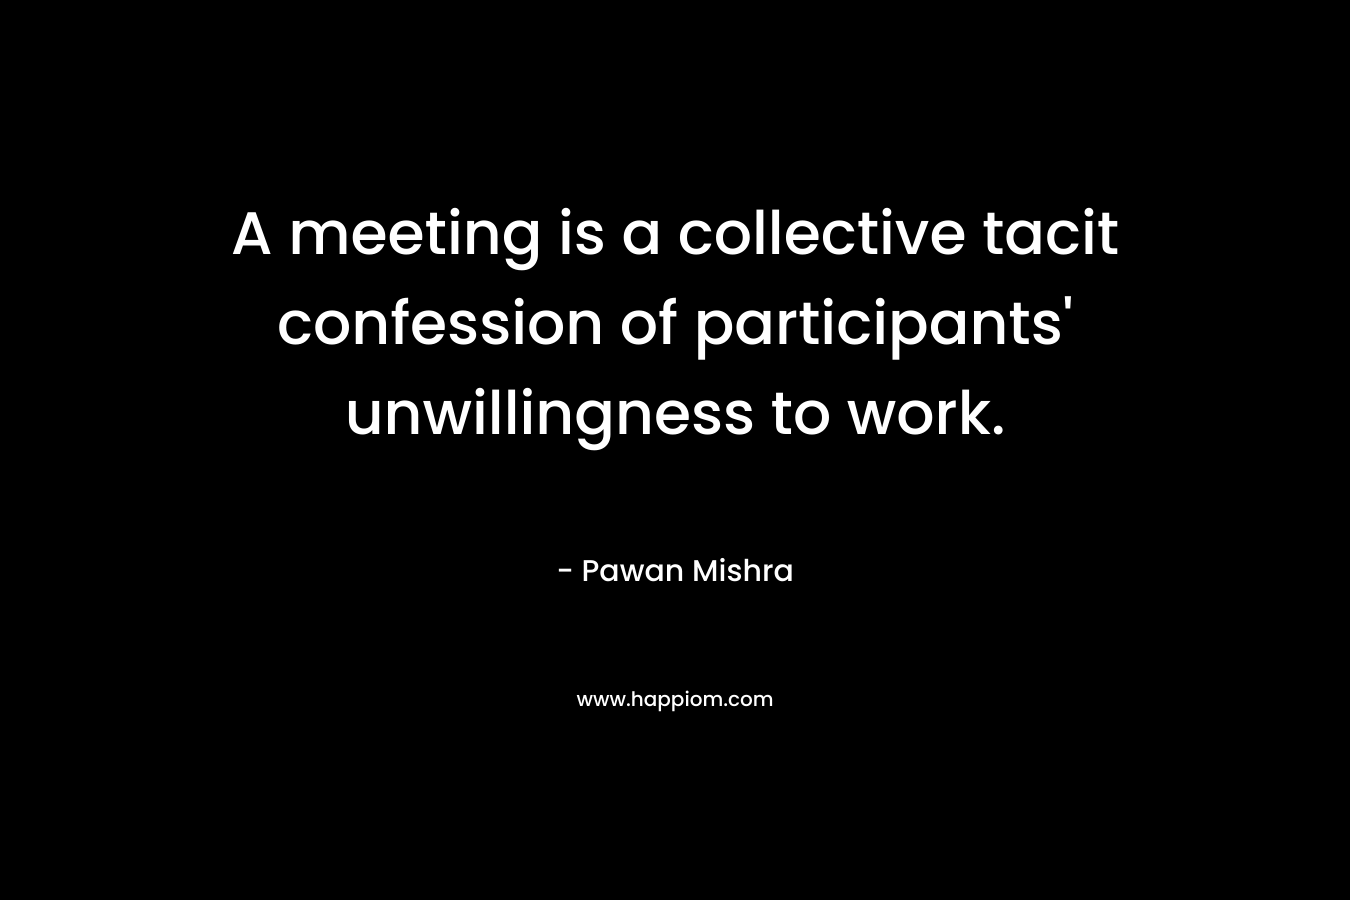 A meeting is a collective tacit confession of participants’ unwillingness to work. – Pawan Mishra